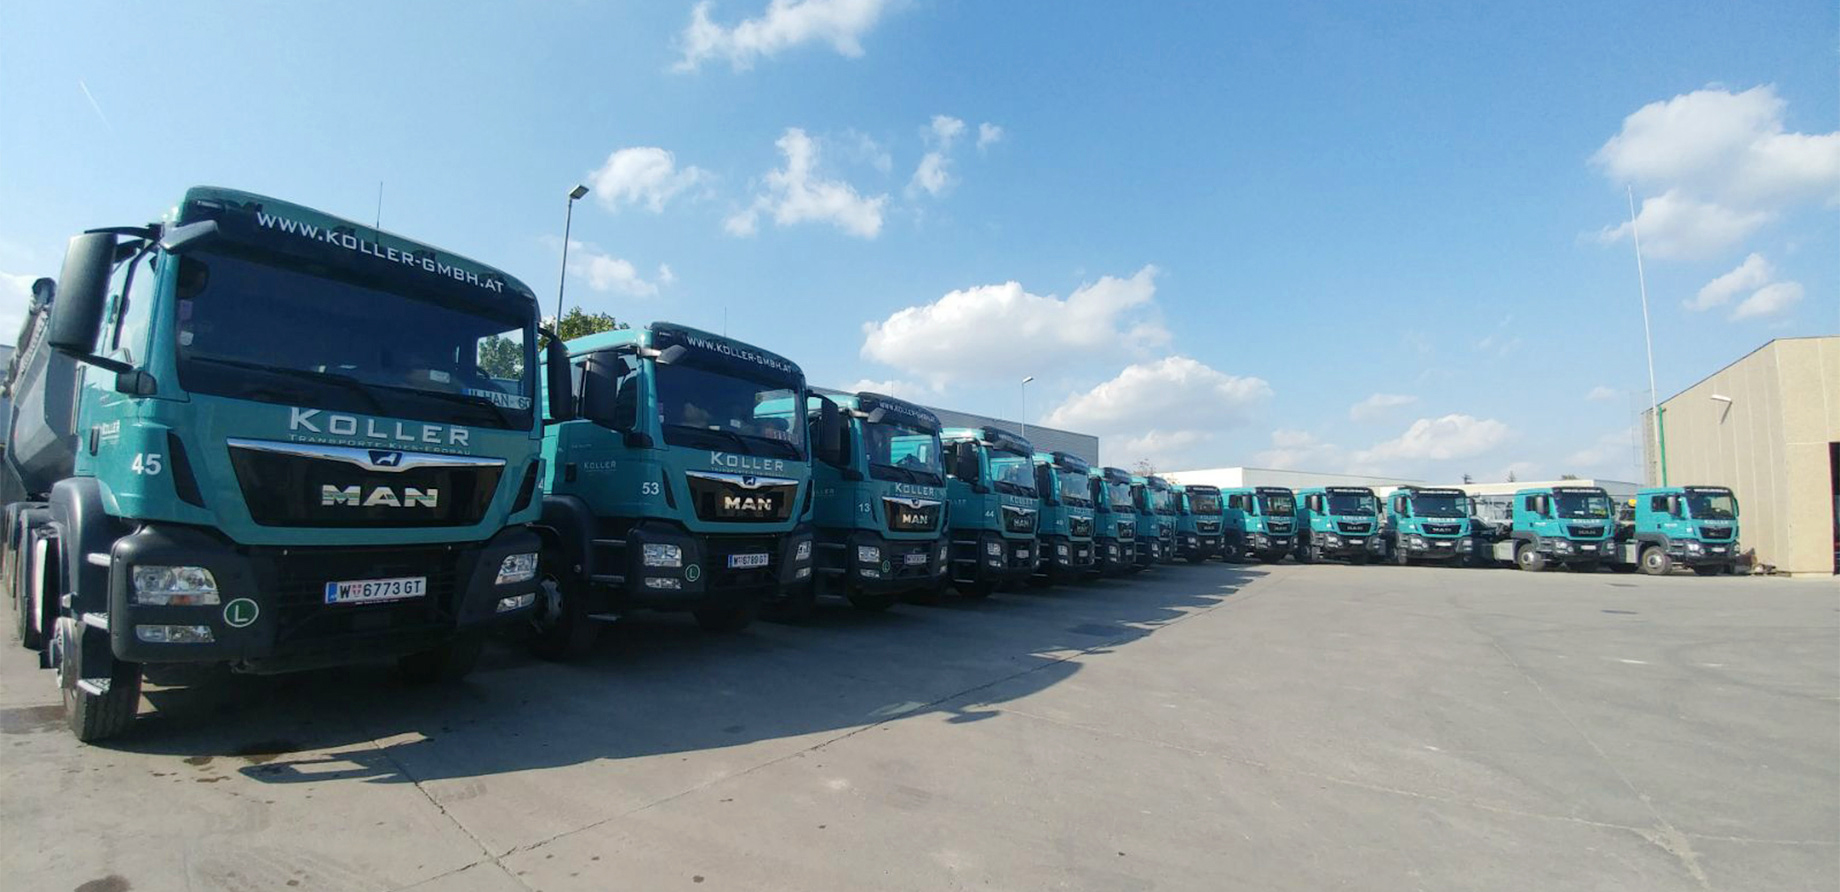 Photo: A good dozen lorries parked next to each other in an L-shape on a large asphalt concrete surface; a logistics warehouse in the background